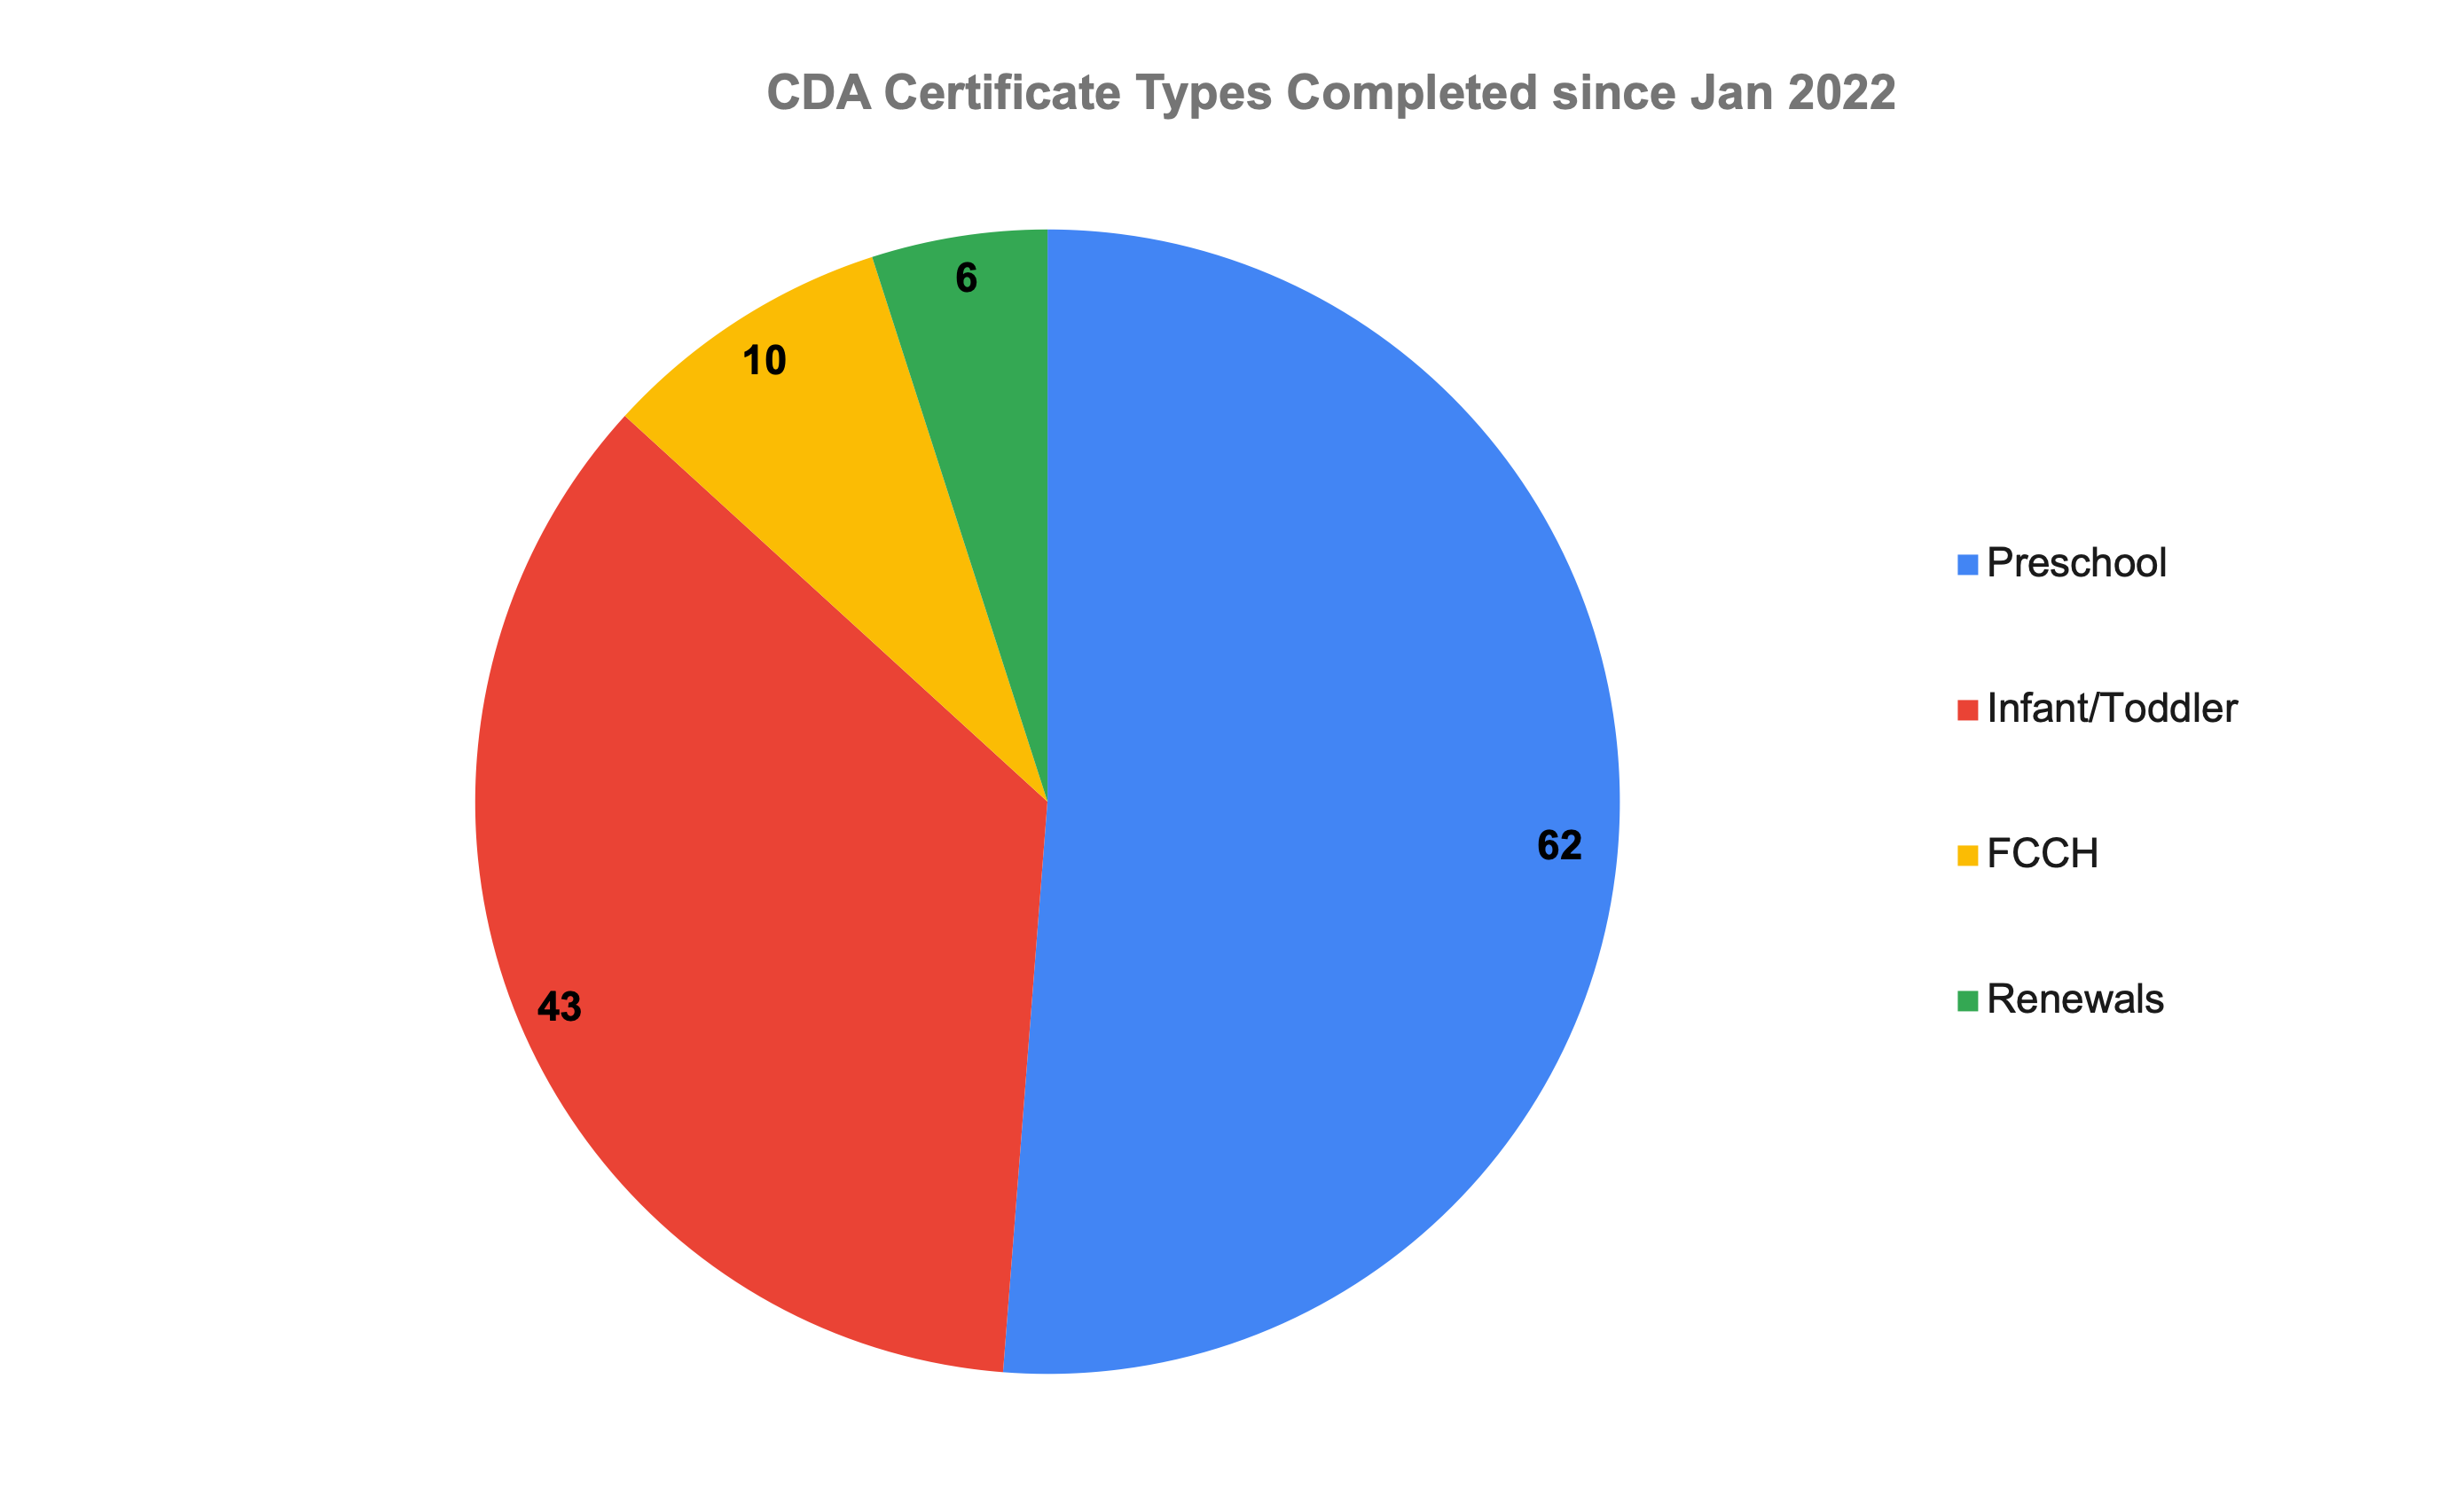 pie chart showing CDA certificate types completed since 2022